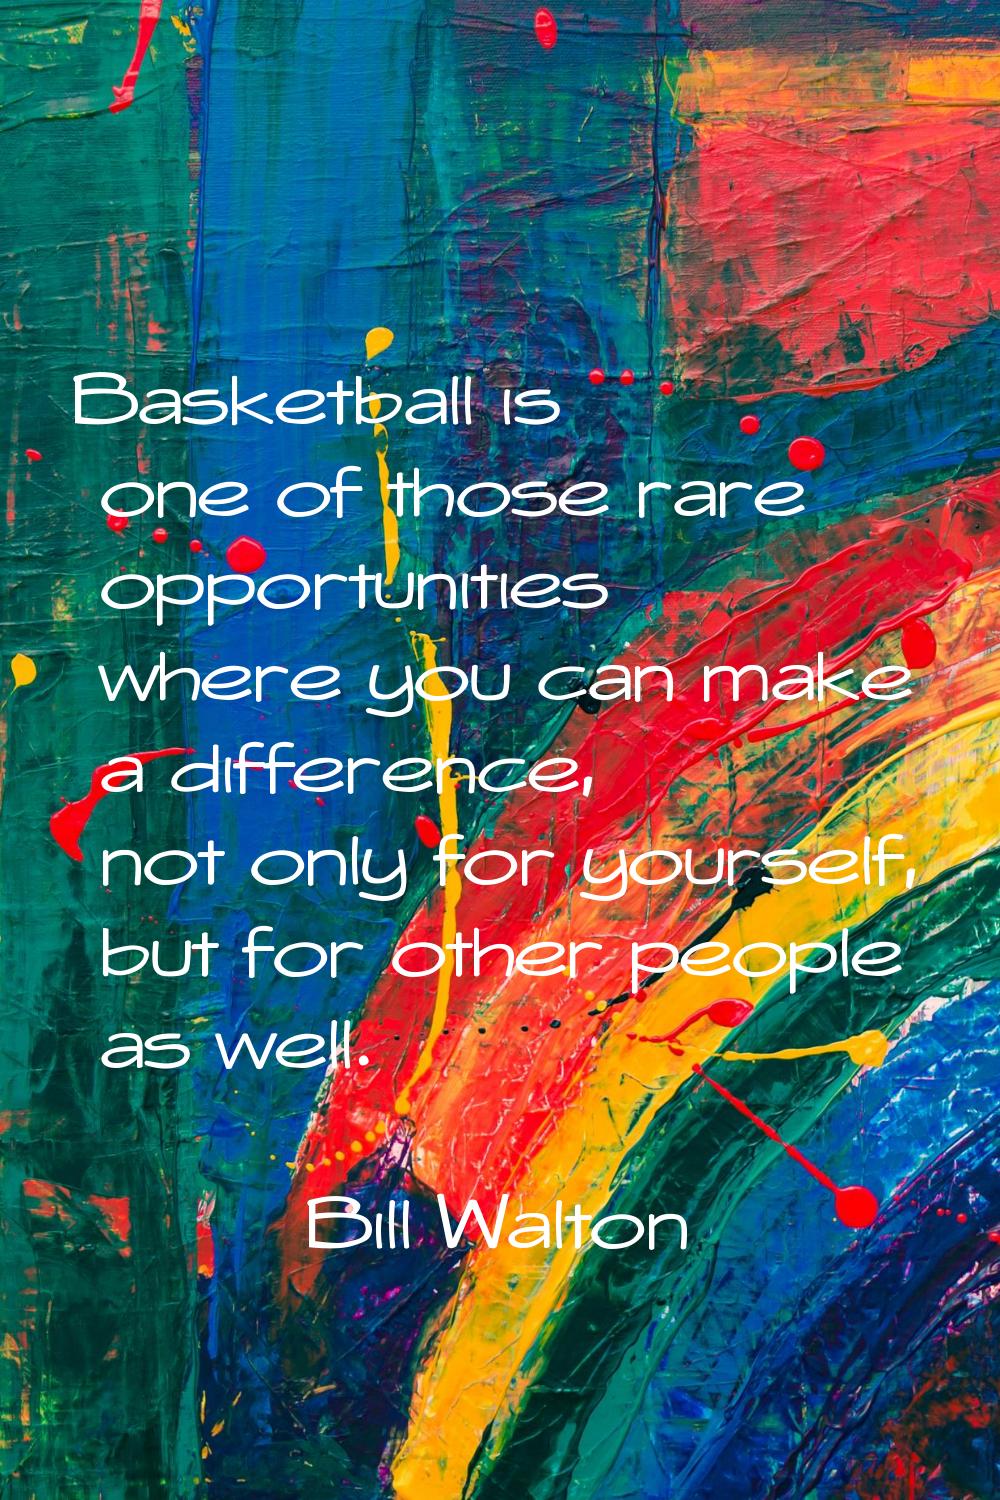 Basketball is one of those rare opportunities where you can make a difference, not only for yoursel